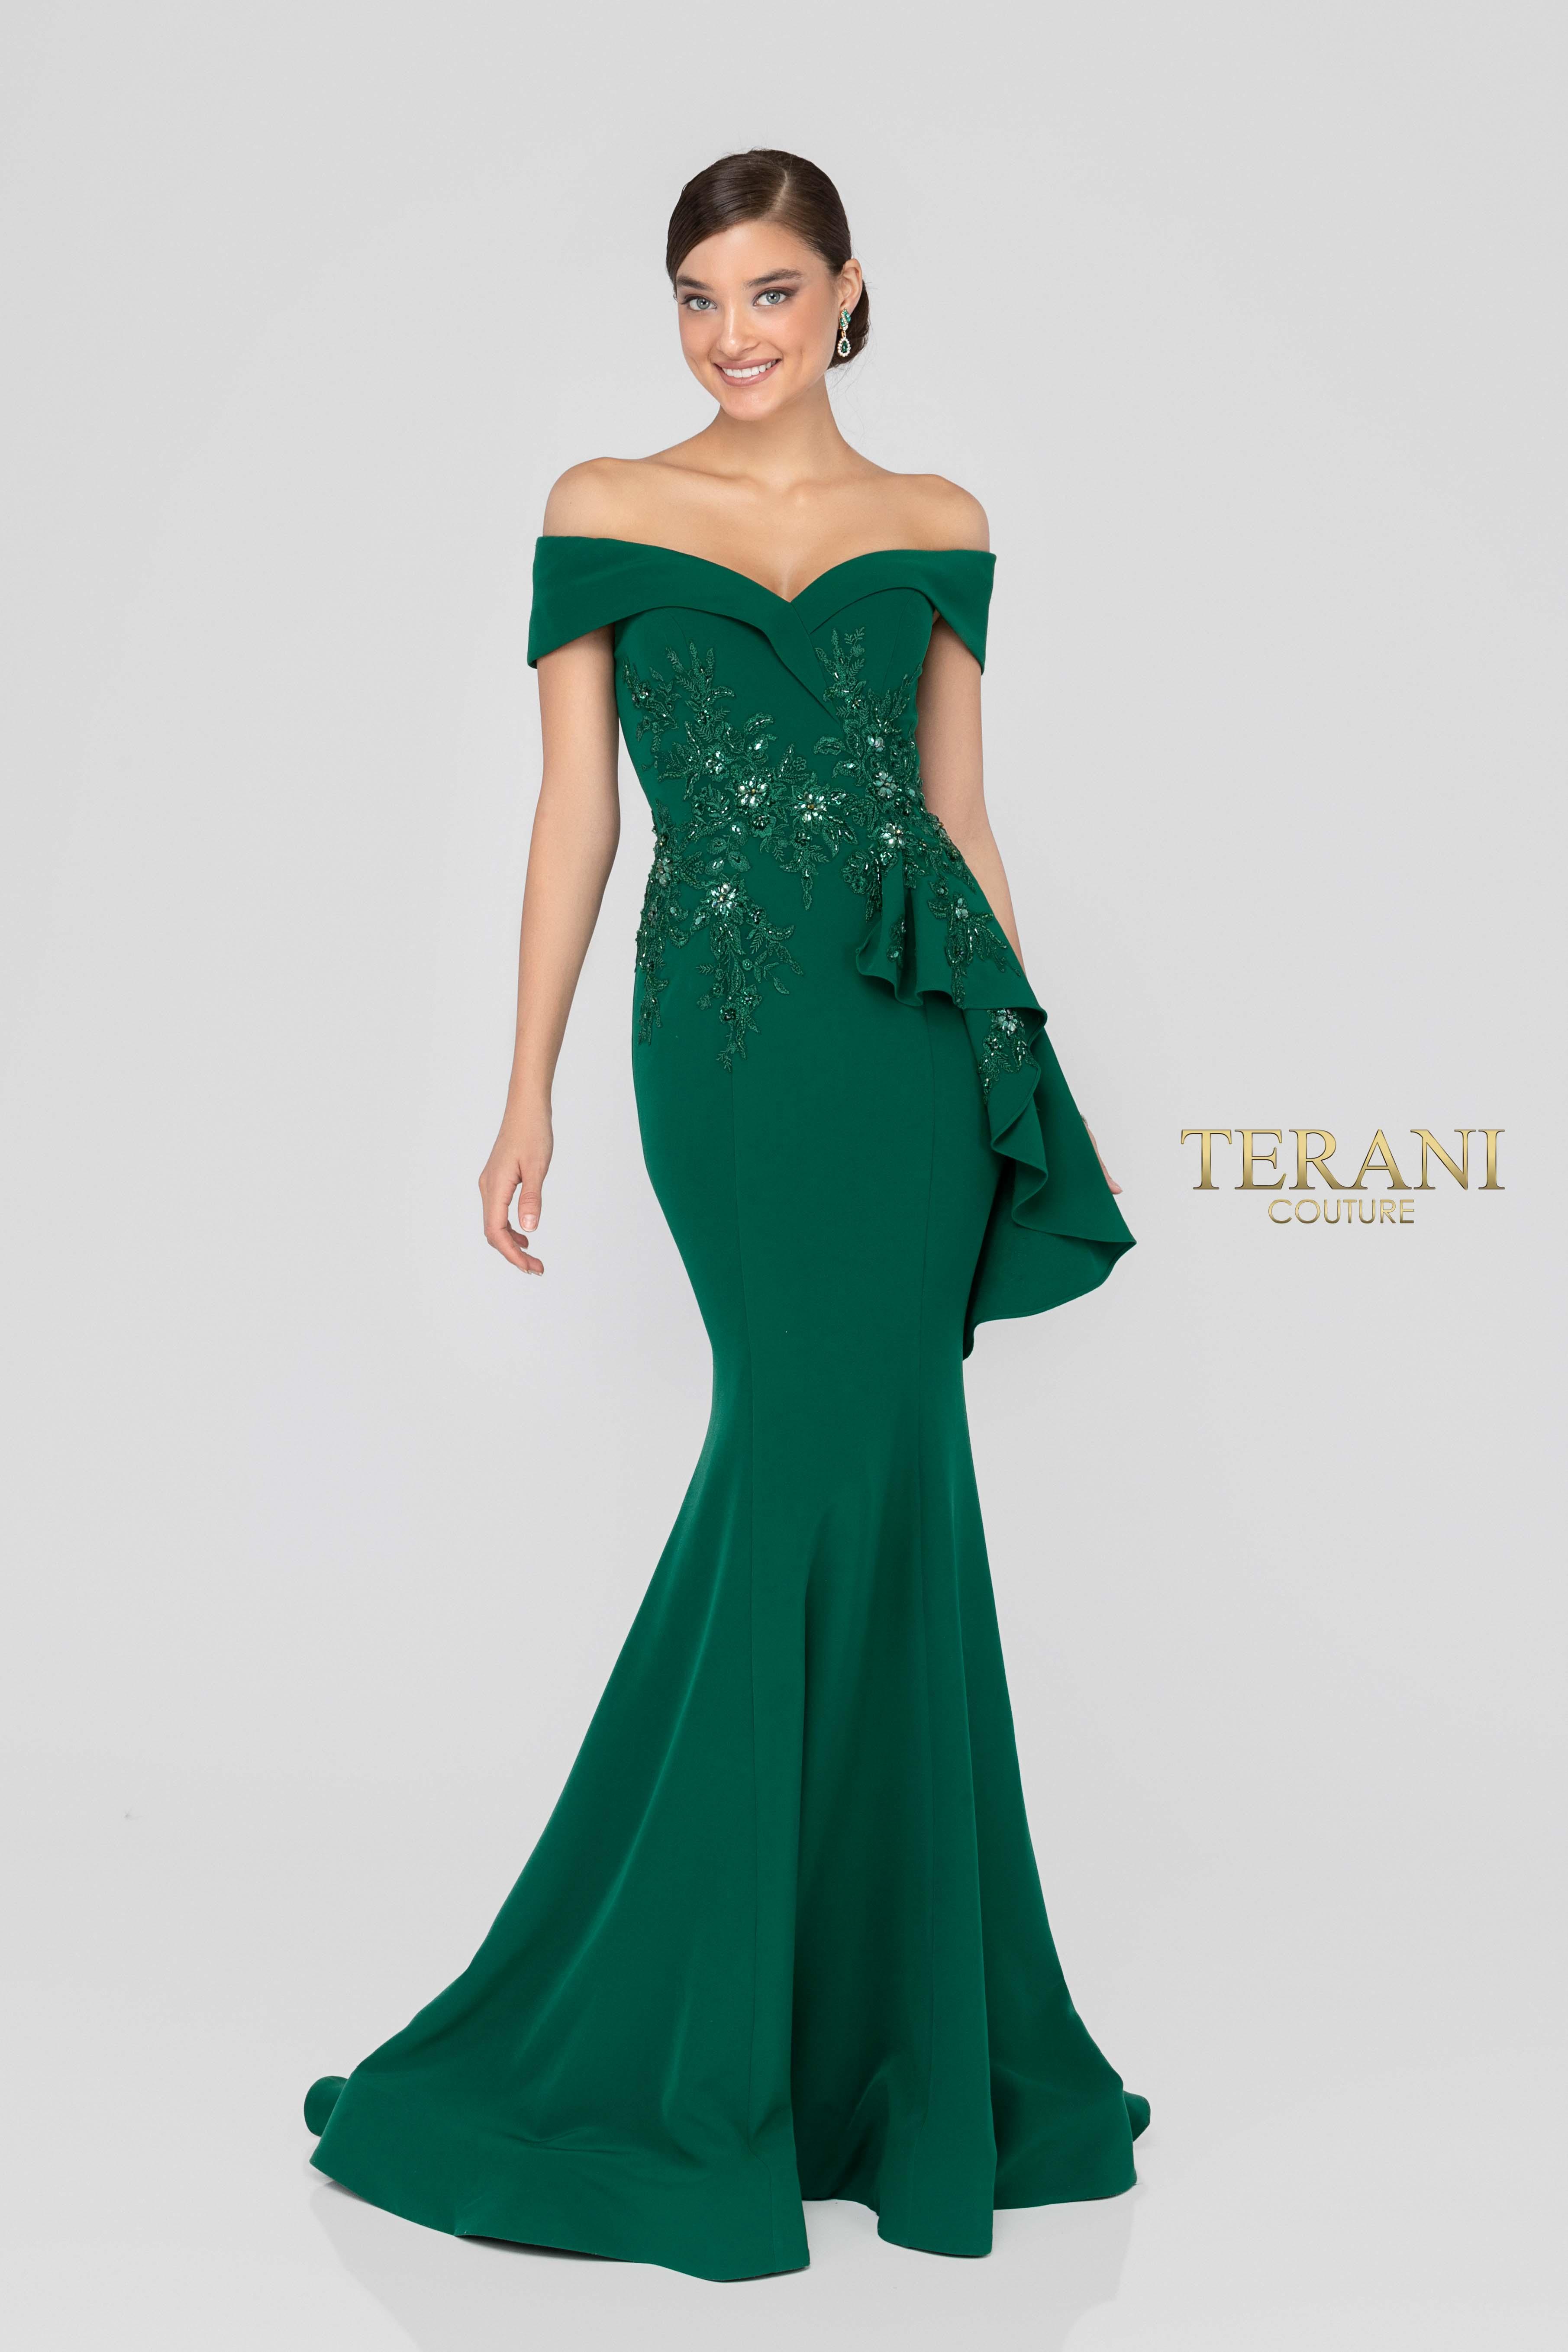 Terani Mother of the Occasion Trunk Show